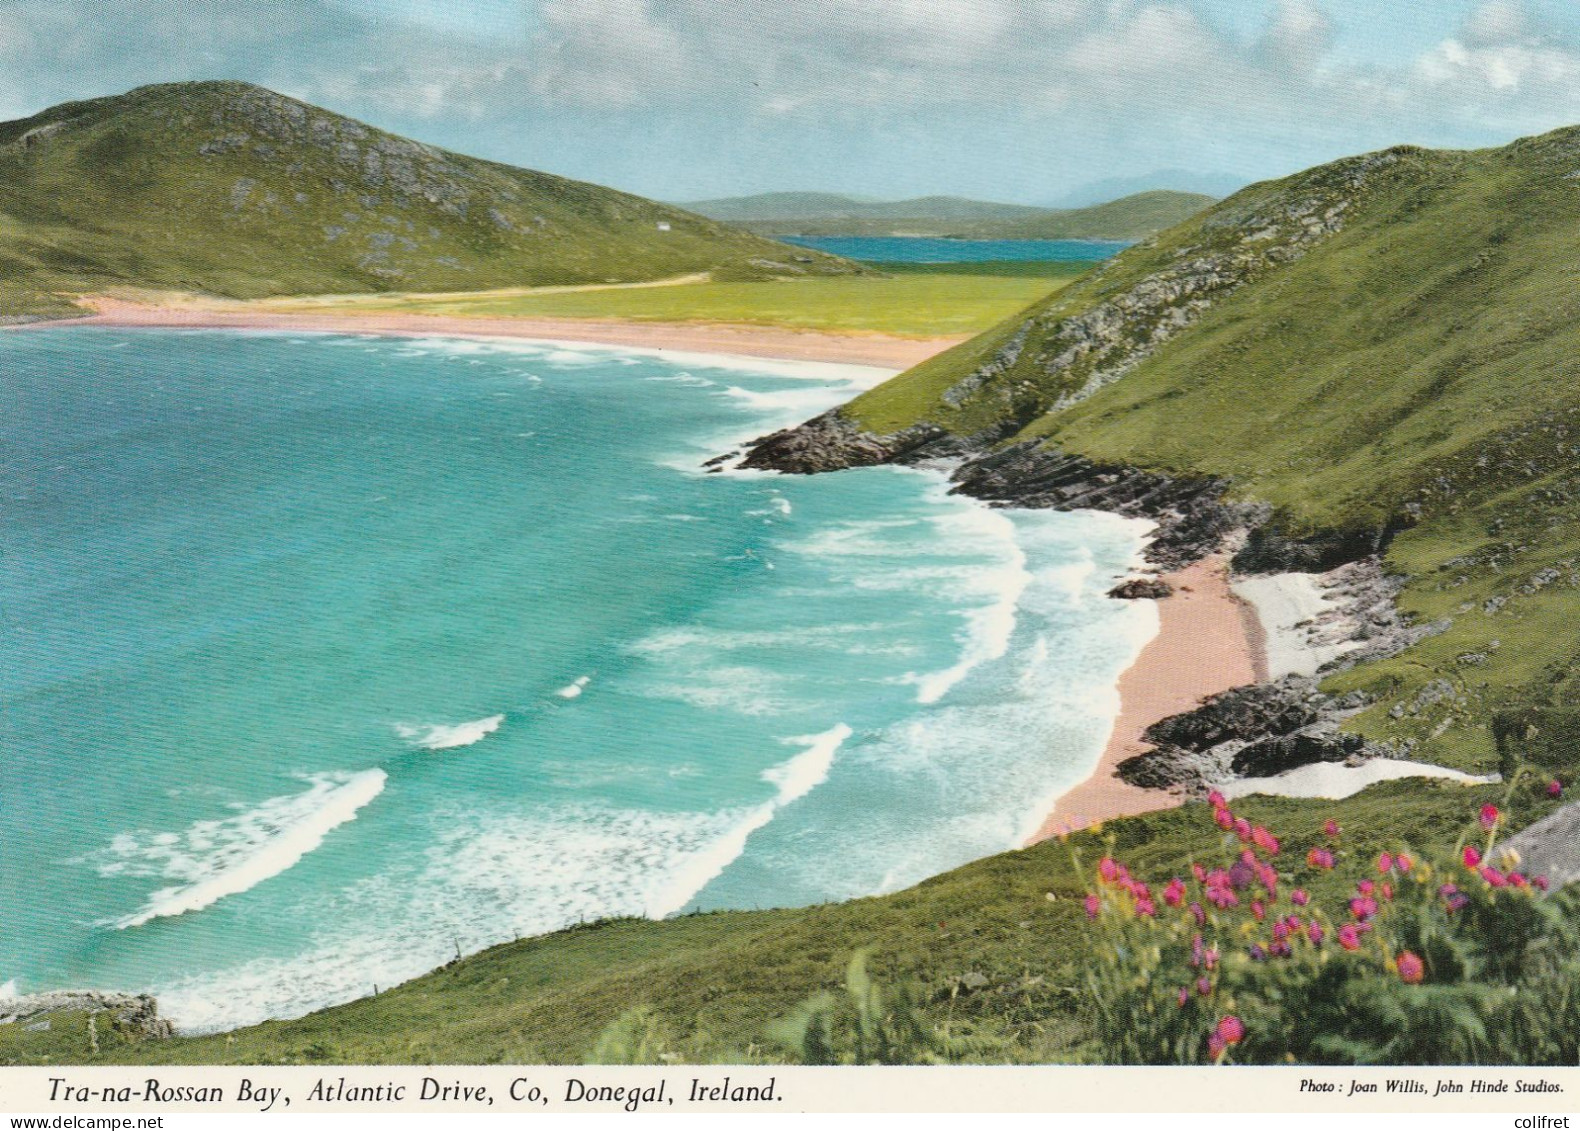 Irlande - Donegal  -  Tra-na-Rossan Bay, Atlantic Drive - Donegal